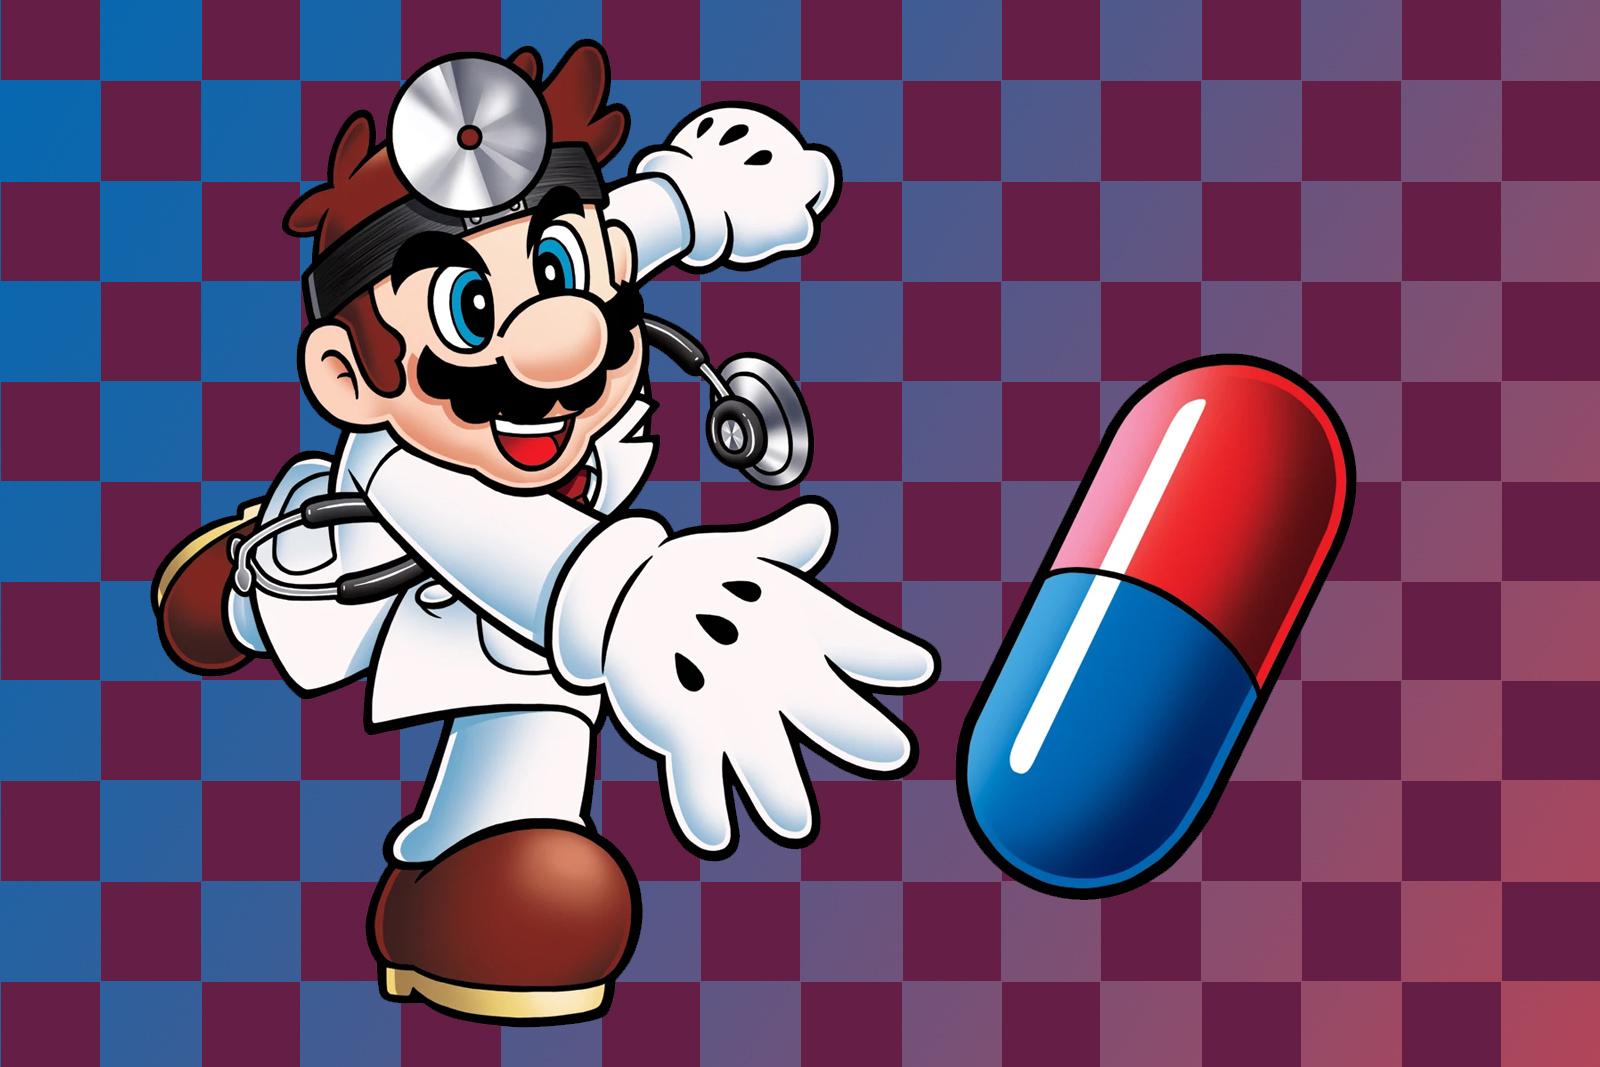 Nintendo is launching a new Dr. Mario game for Android and iOS this